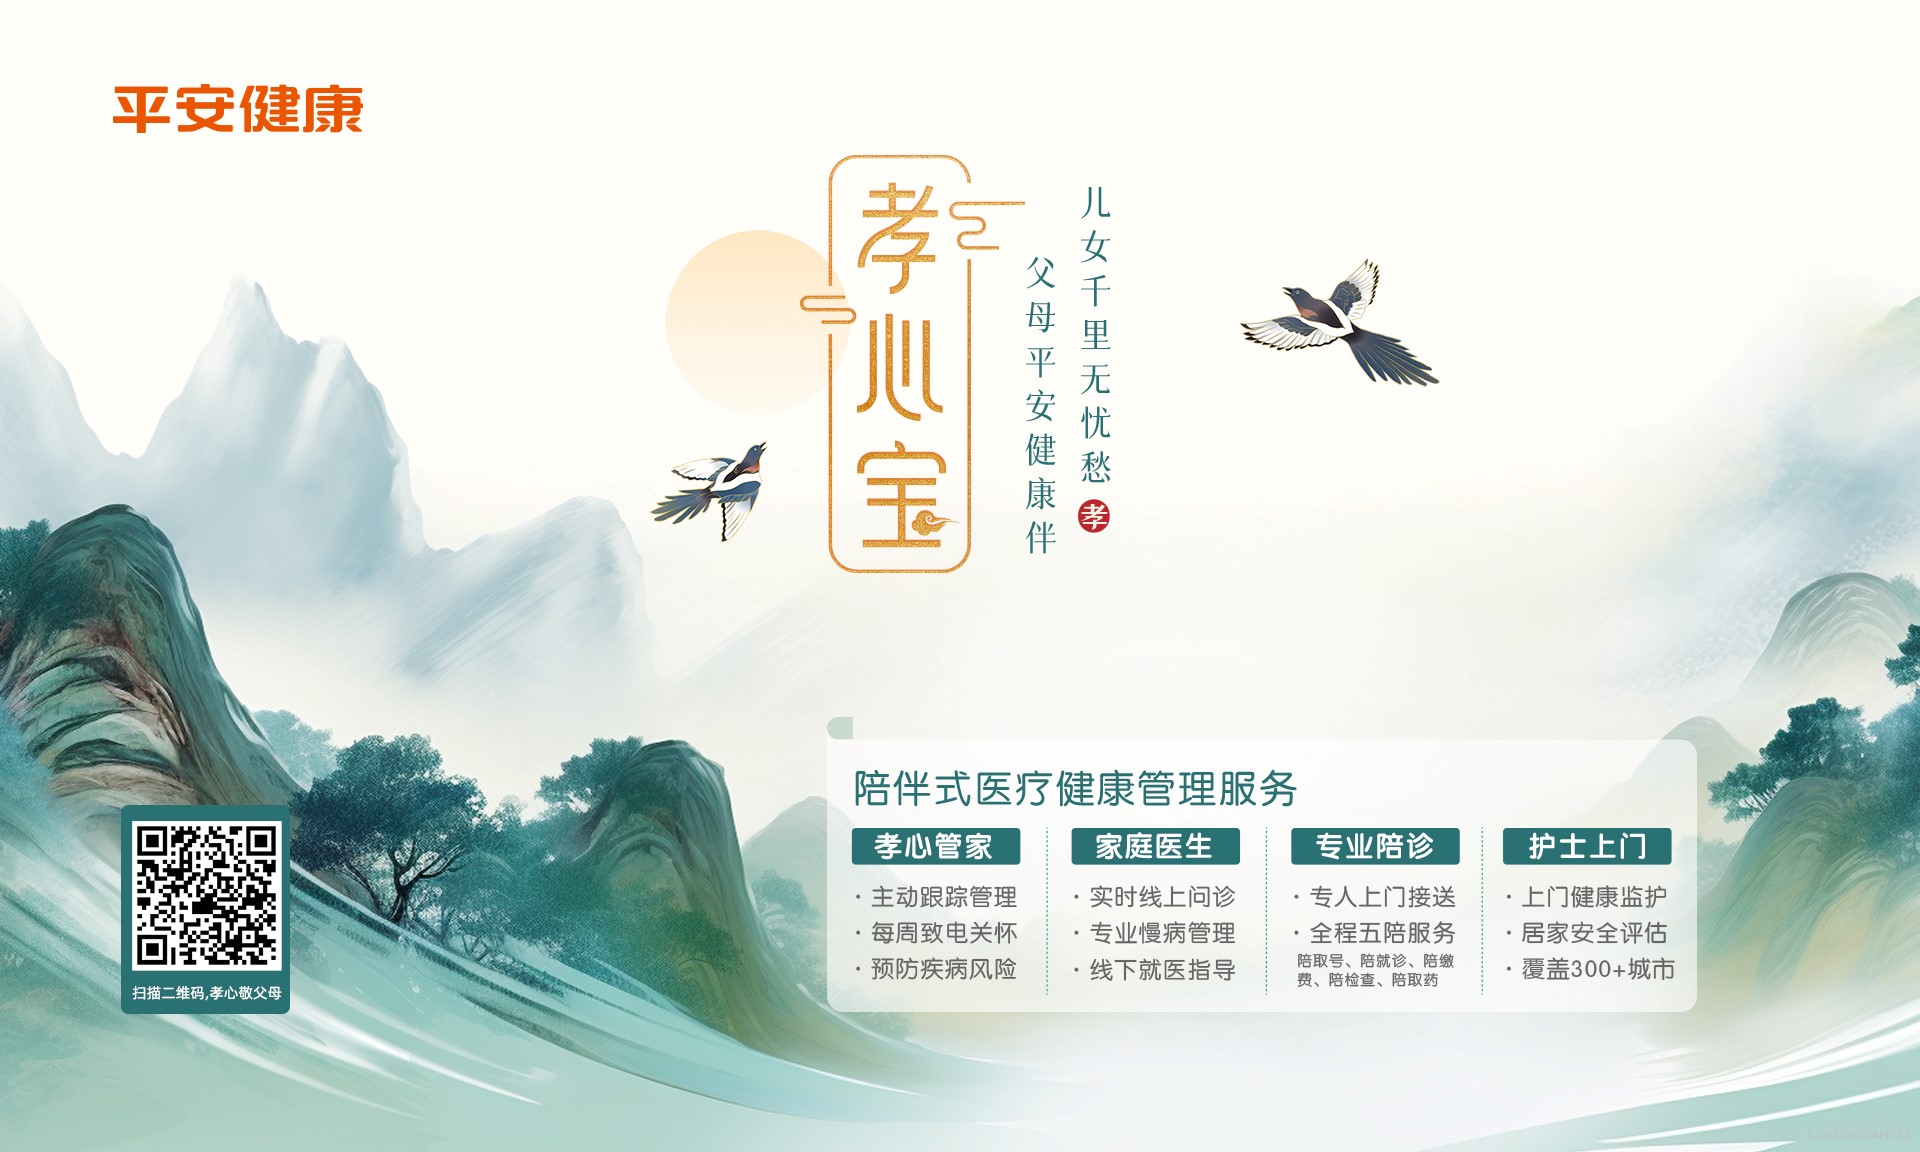 Ping An Health Unveils “Xiaoxinbao”, a Comprehensive Healthcare Service for the Elderly